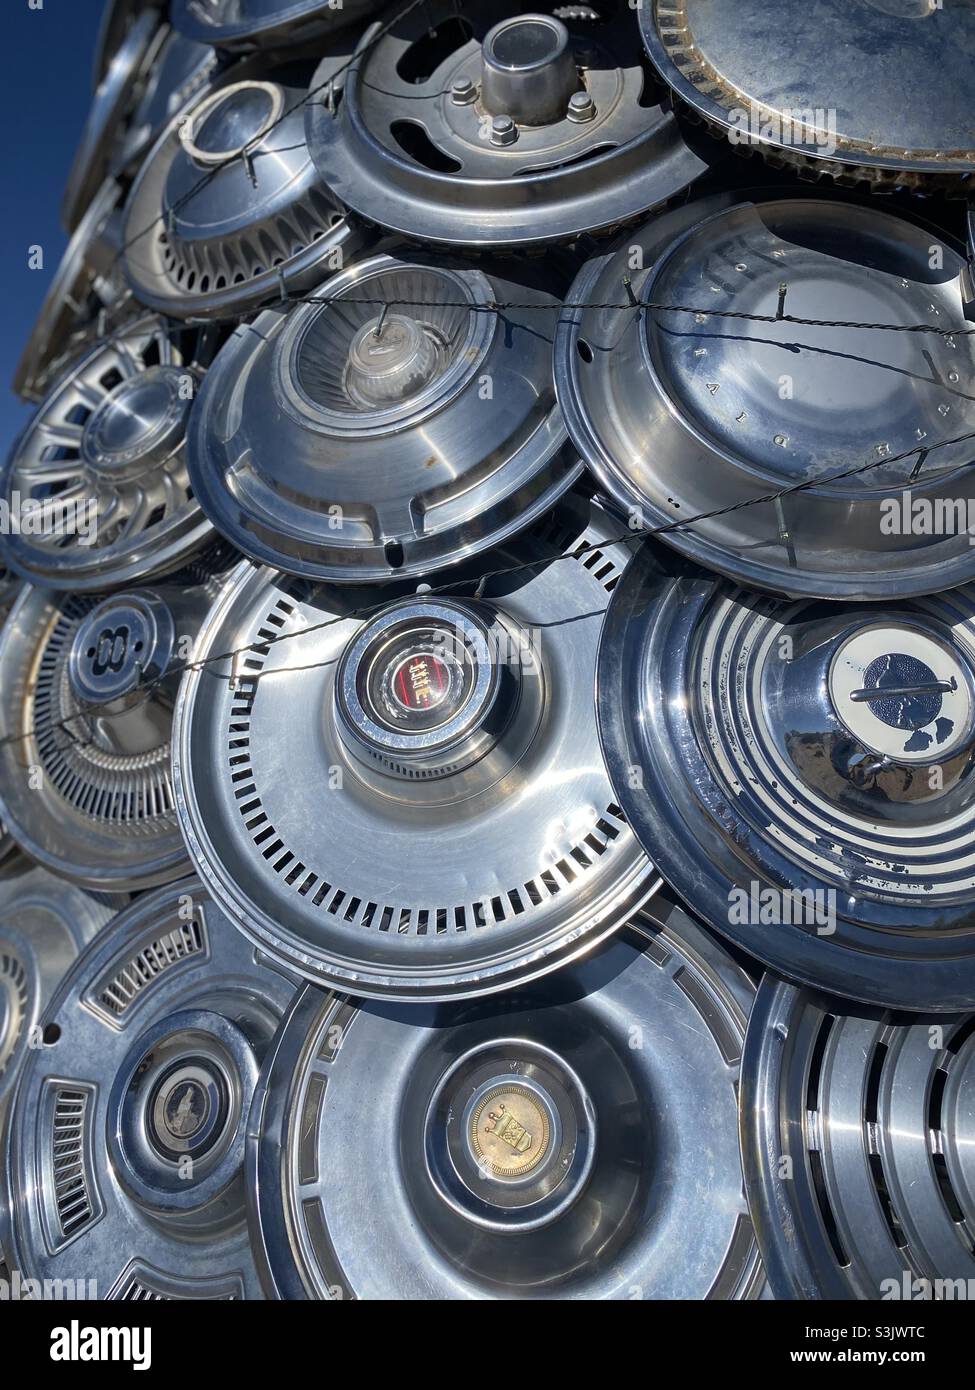 Pile of old hubcaps Stock Photo